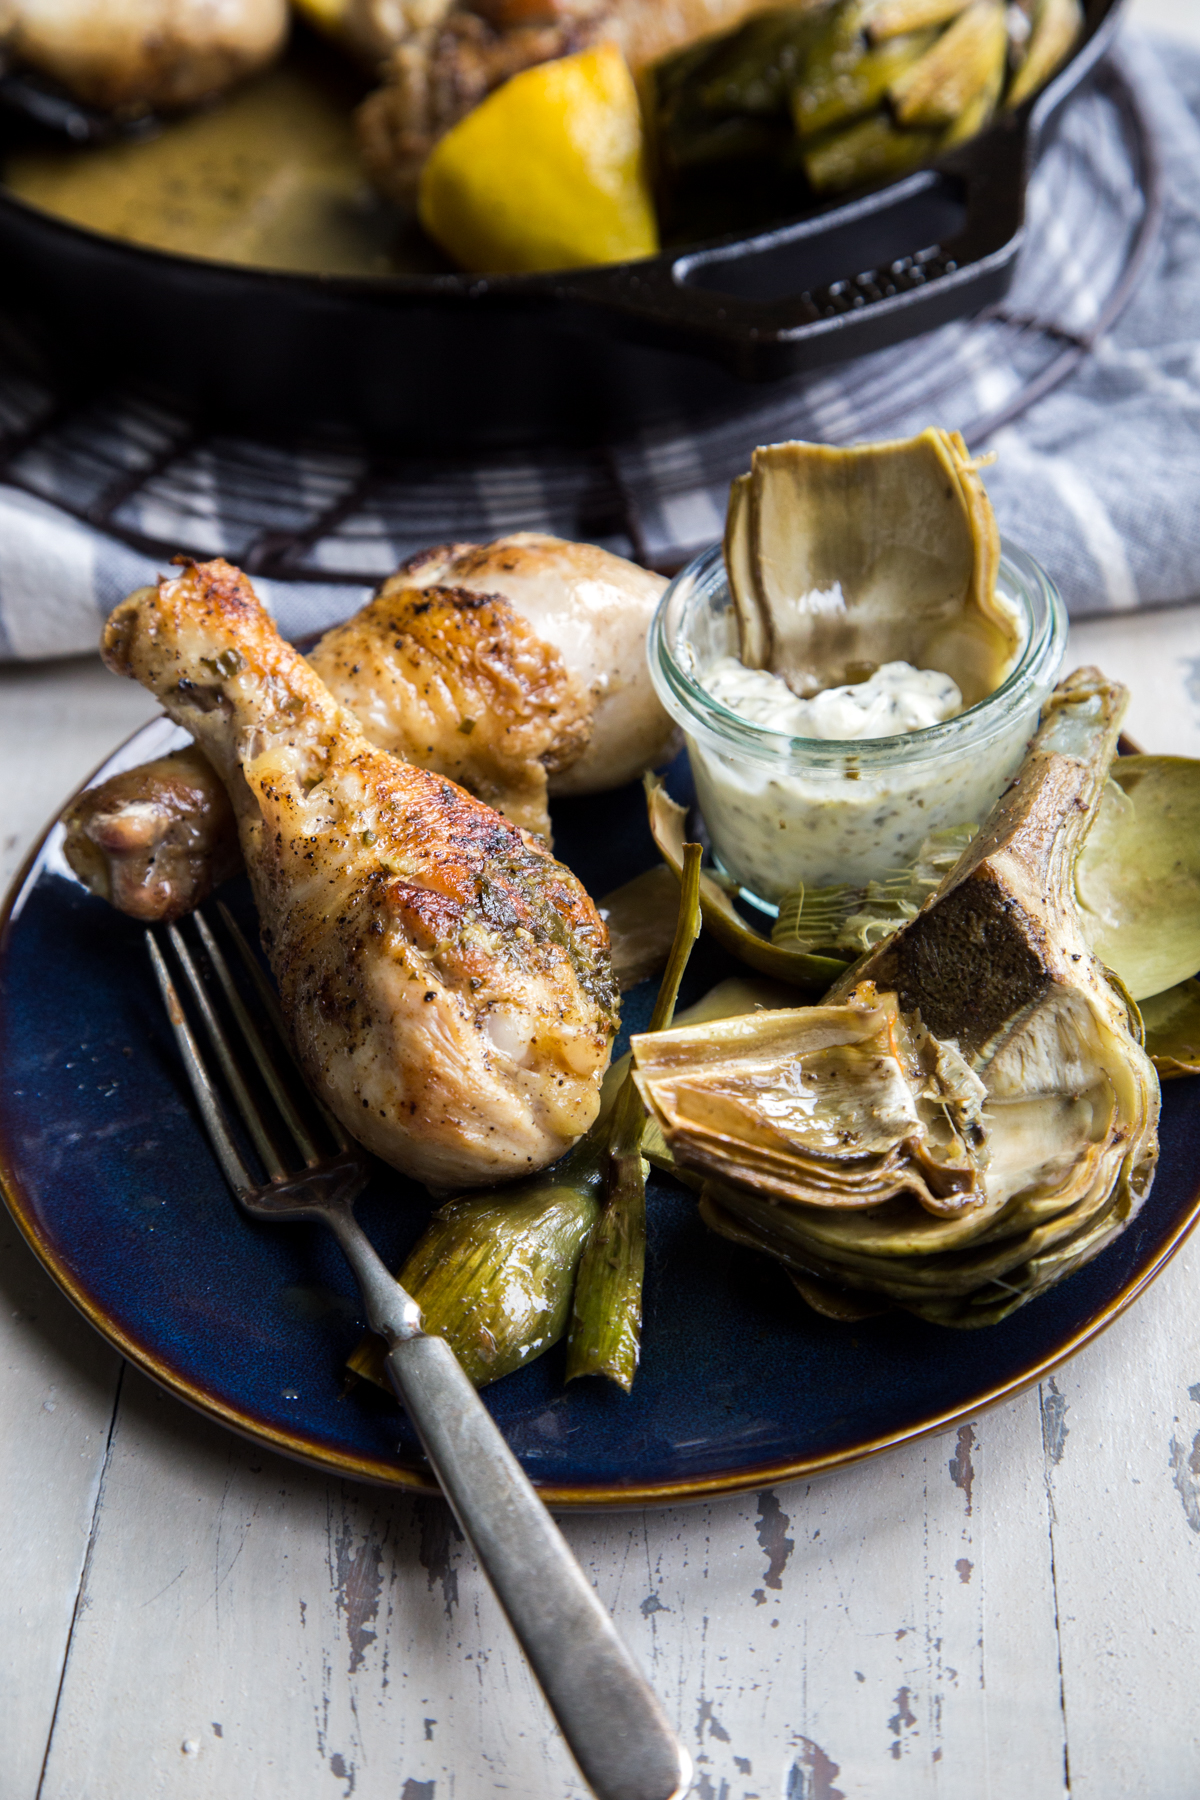 Roasted chicken drumsticks and artichokes on plate